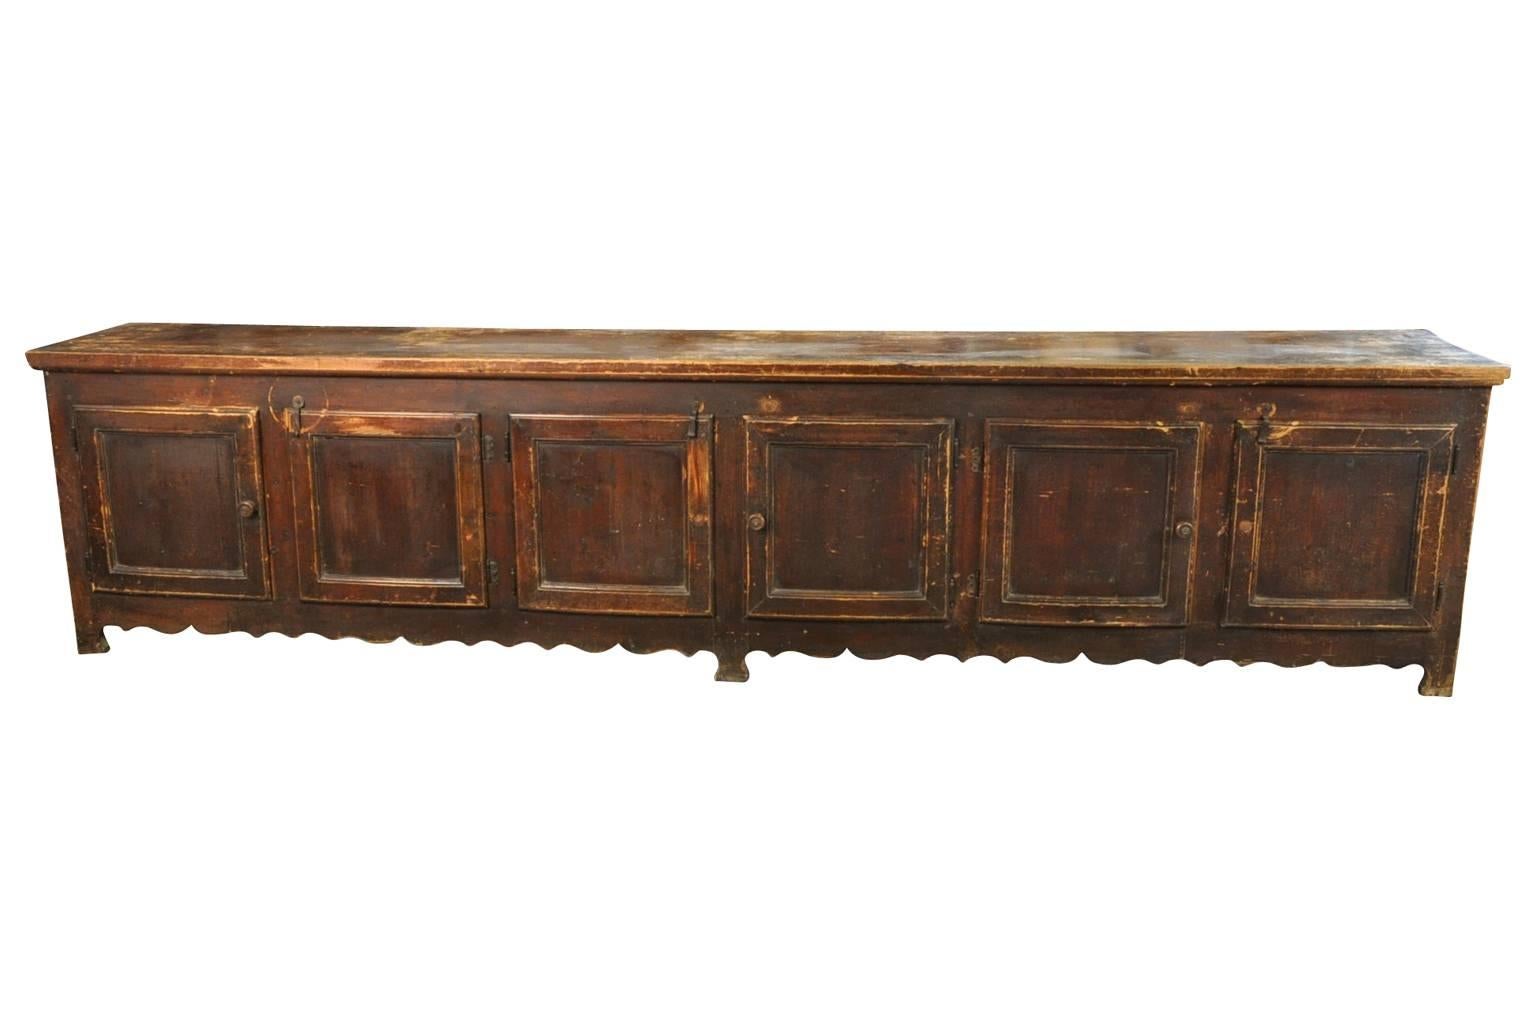 A terrific grand scale enfilade - buffet from the South of France.  Wonderfully constructed with six doors and a delightful sculpted apron.  A tremendous storage piece.